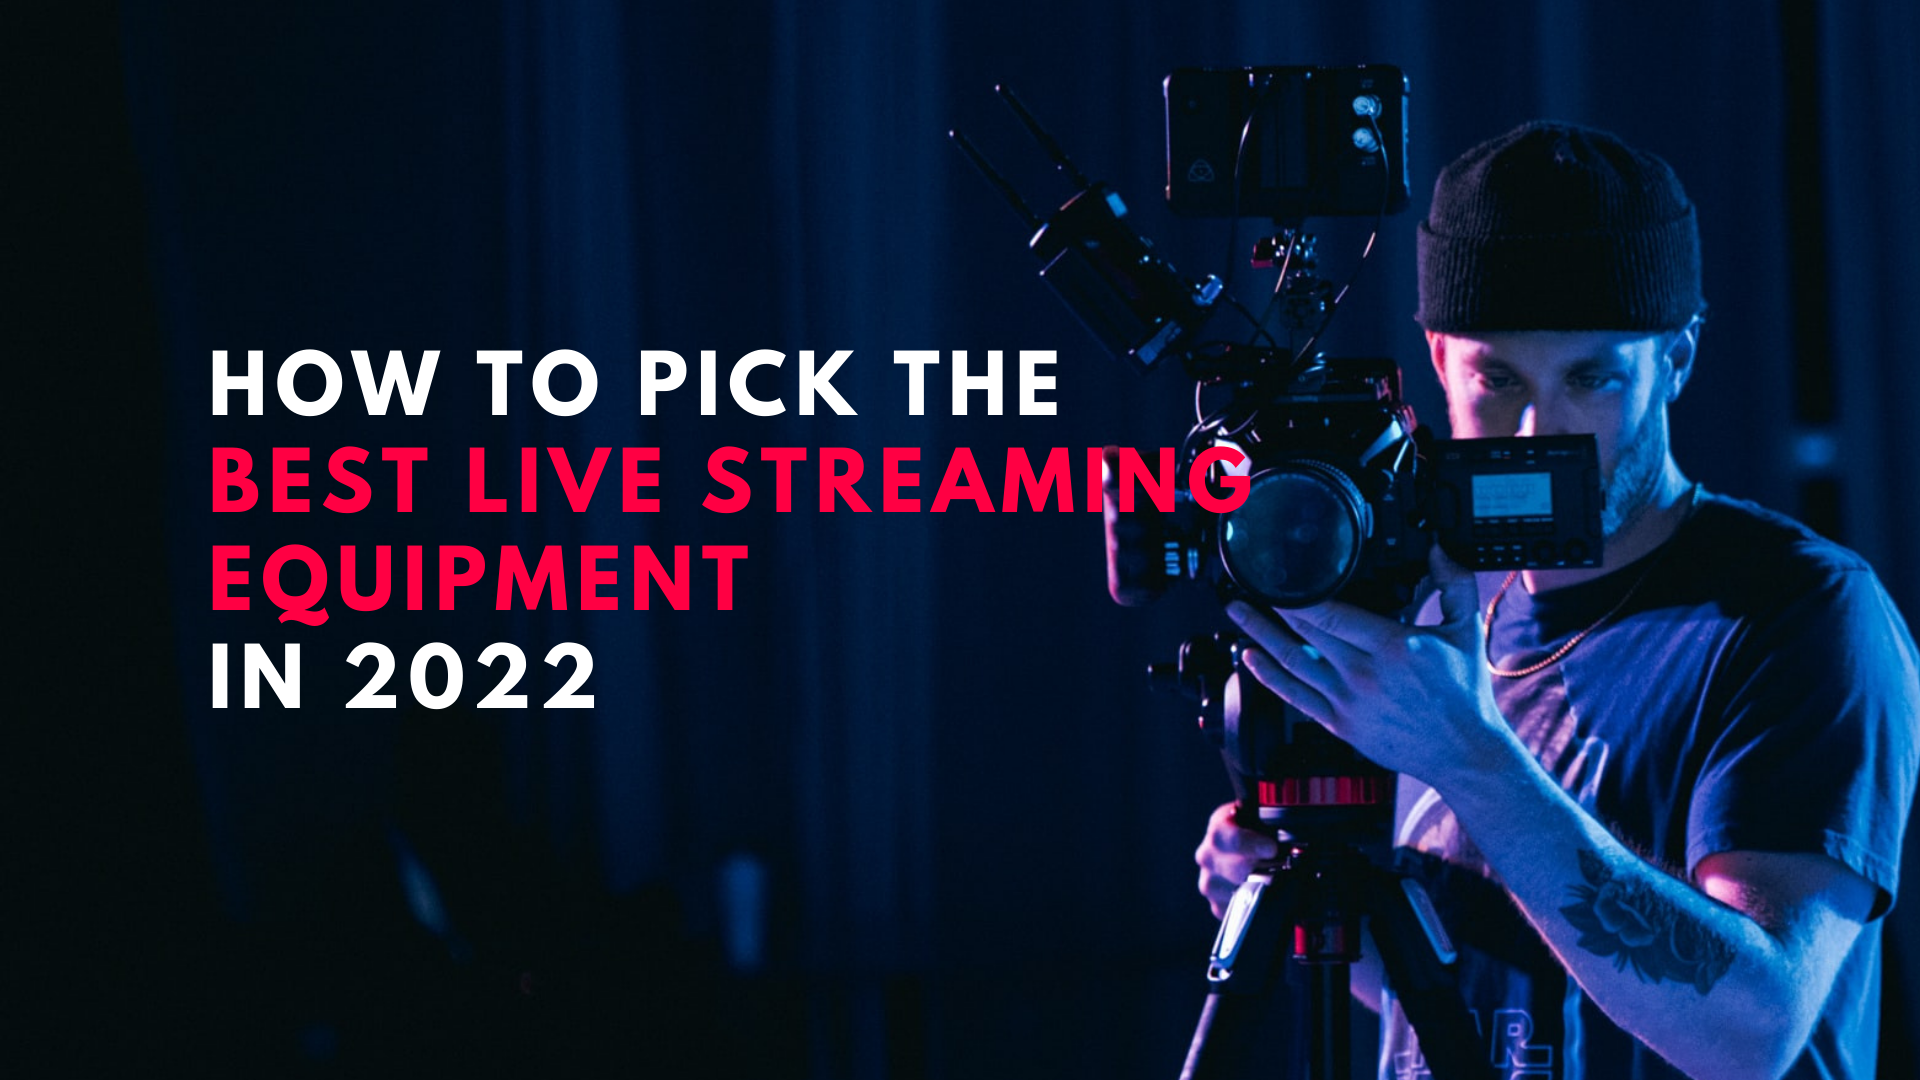 1-Camera Streaming Kit - Church Live Streaming Equipment Packages